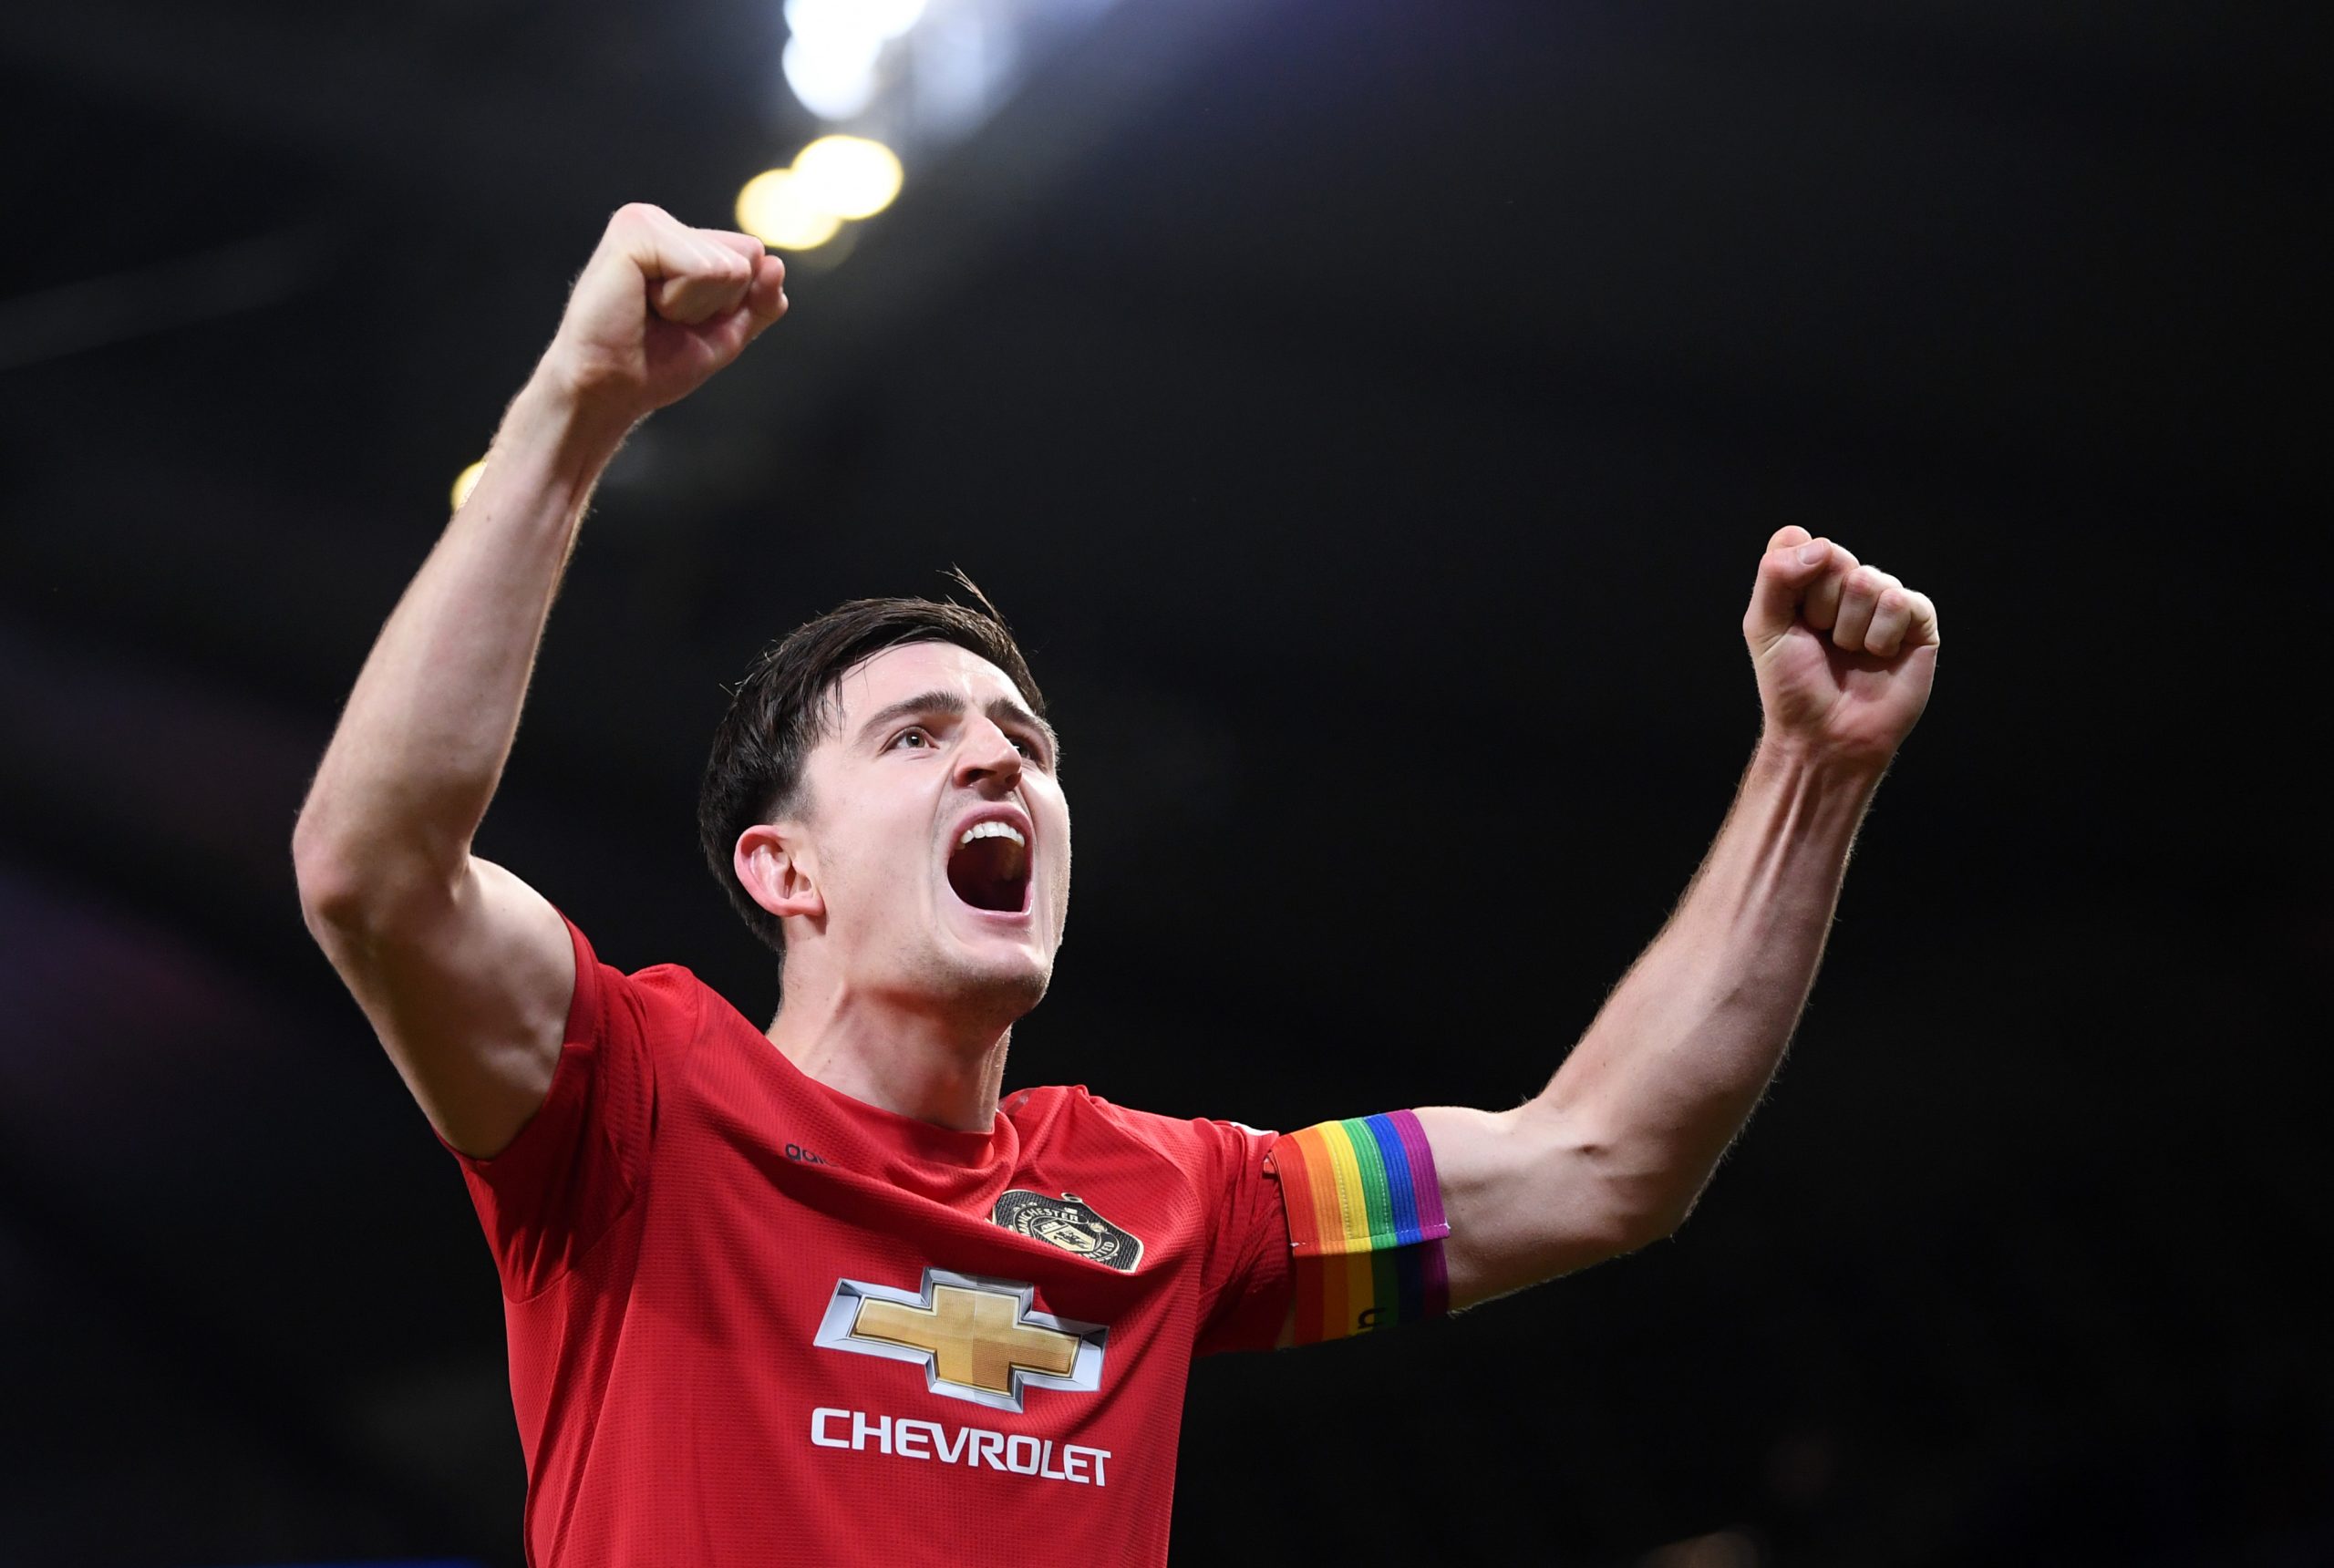 Tottenham Hotspur to push for Manchester United defender Harry Maguire.